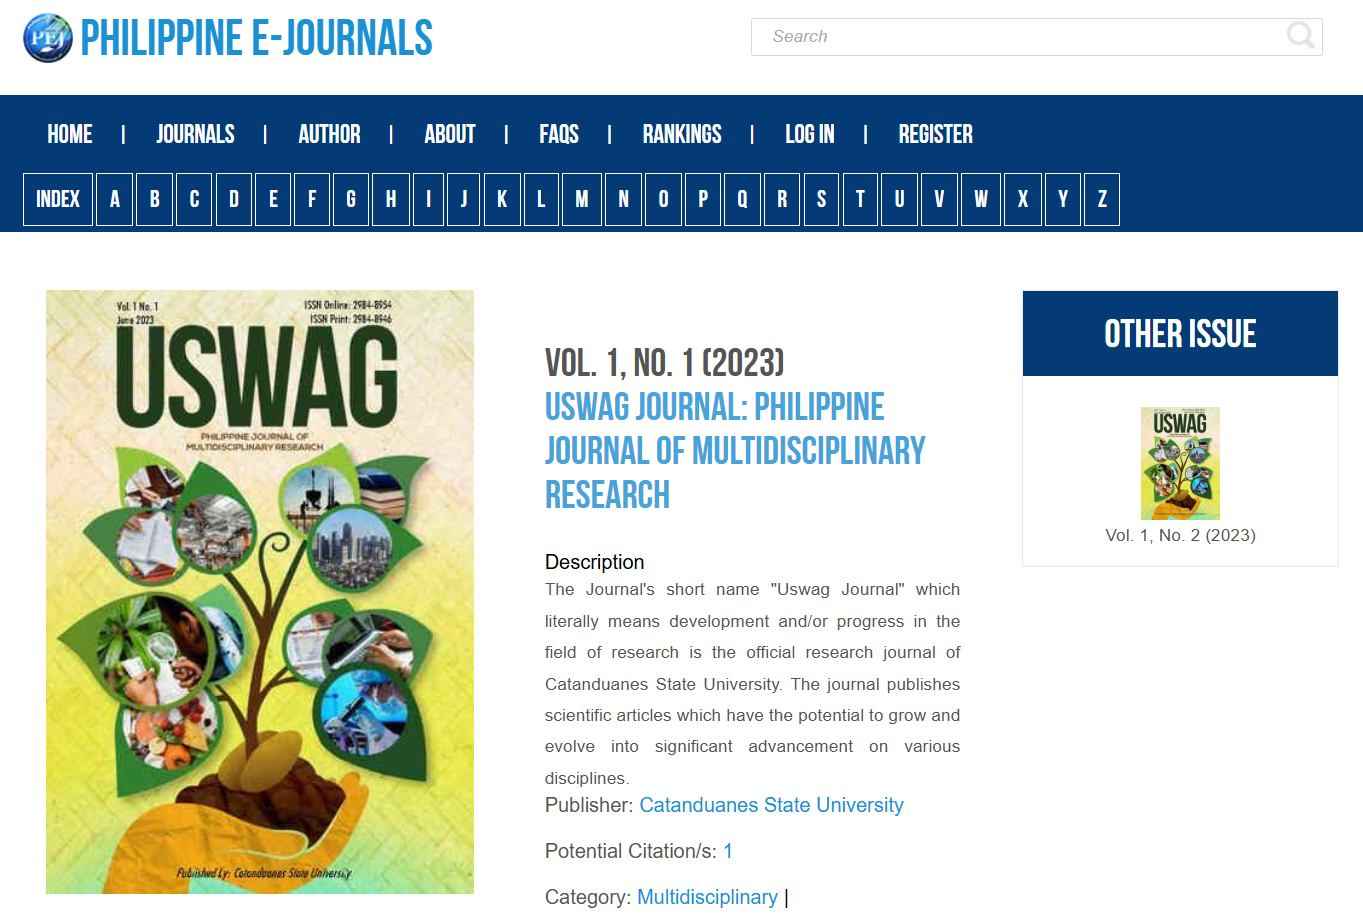 CatSU’s USWAG Journal Now Indexed in Philippine E-Journals